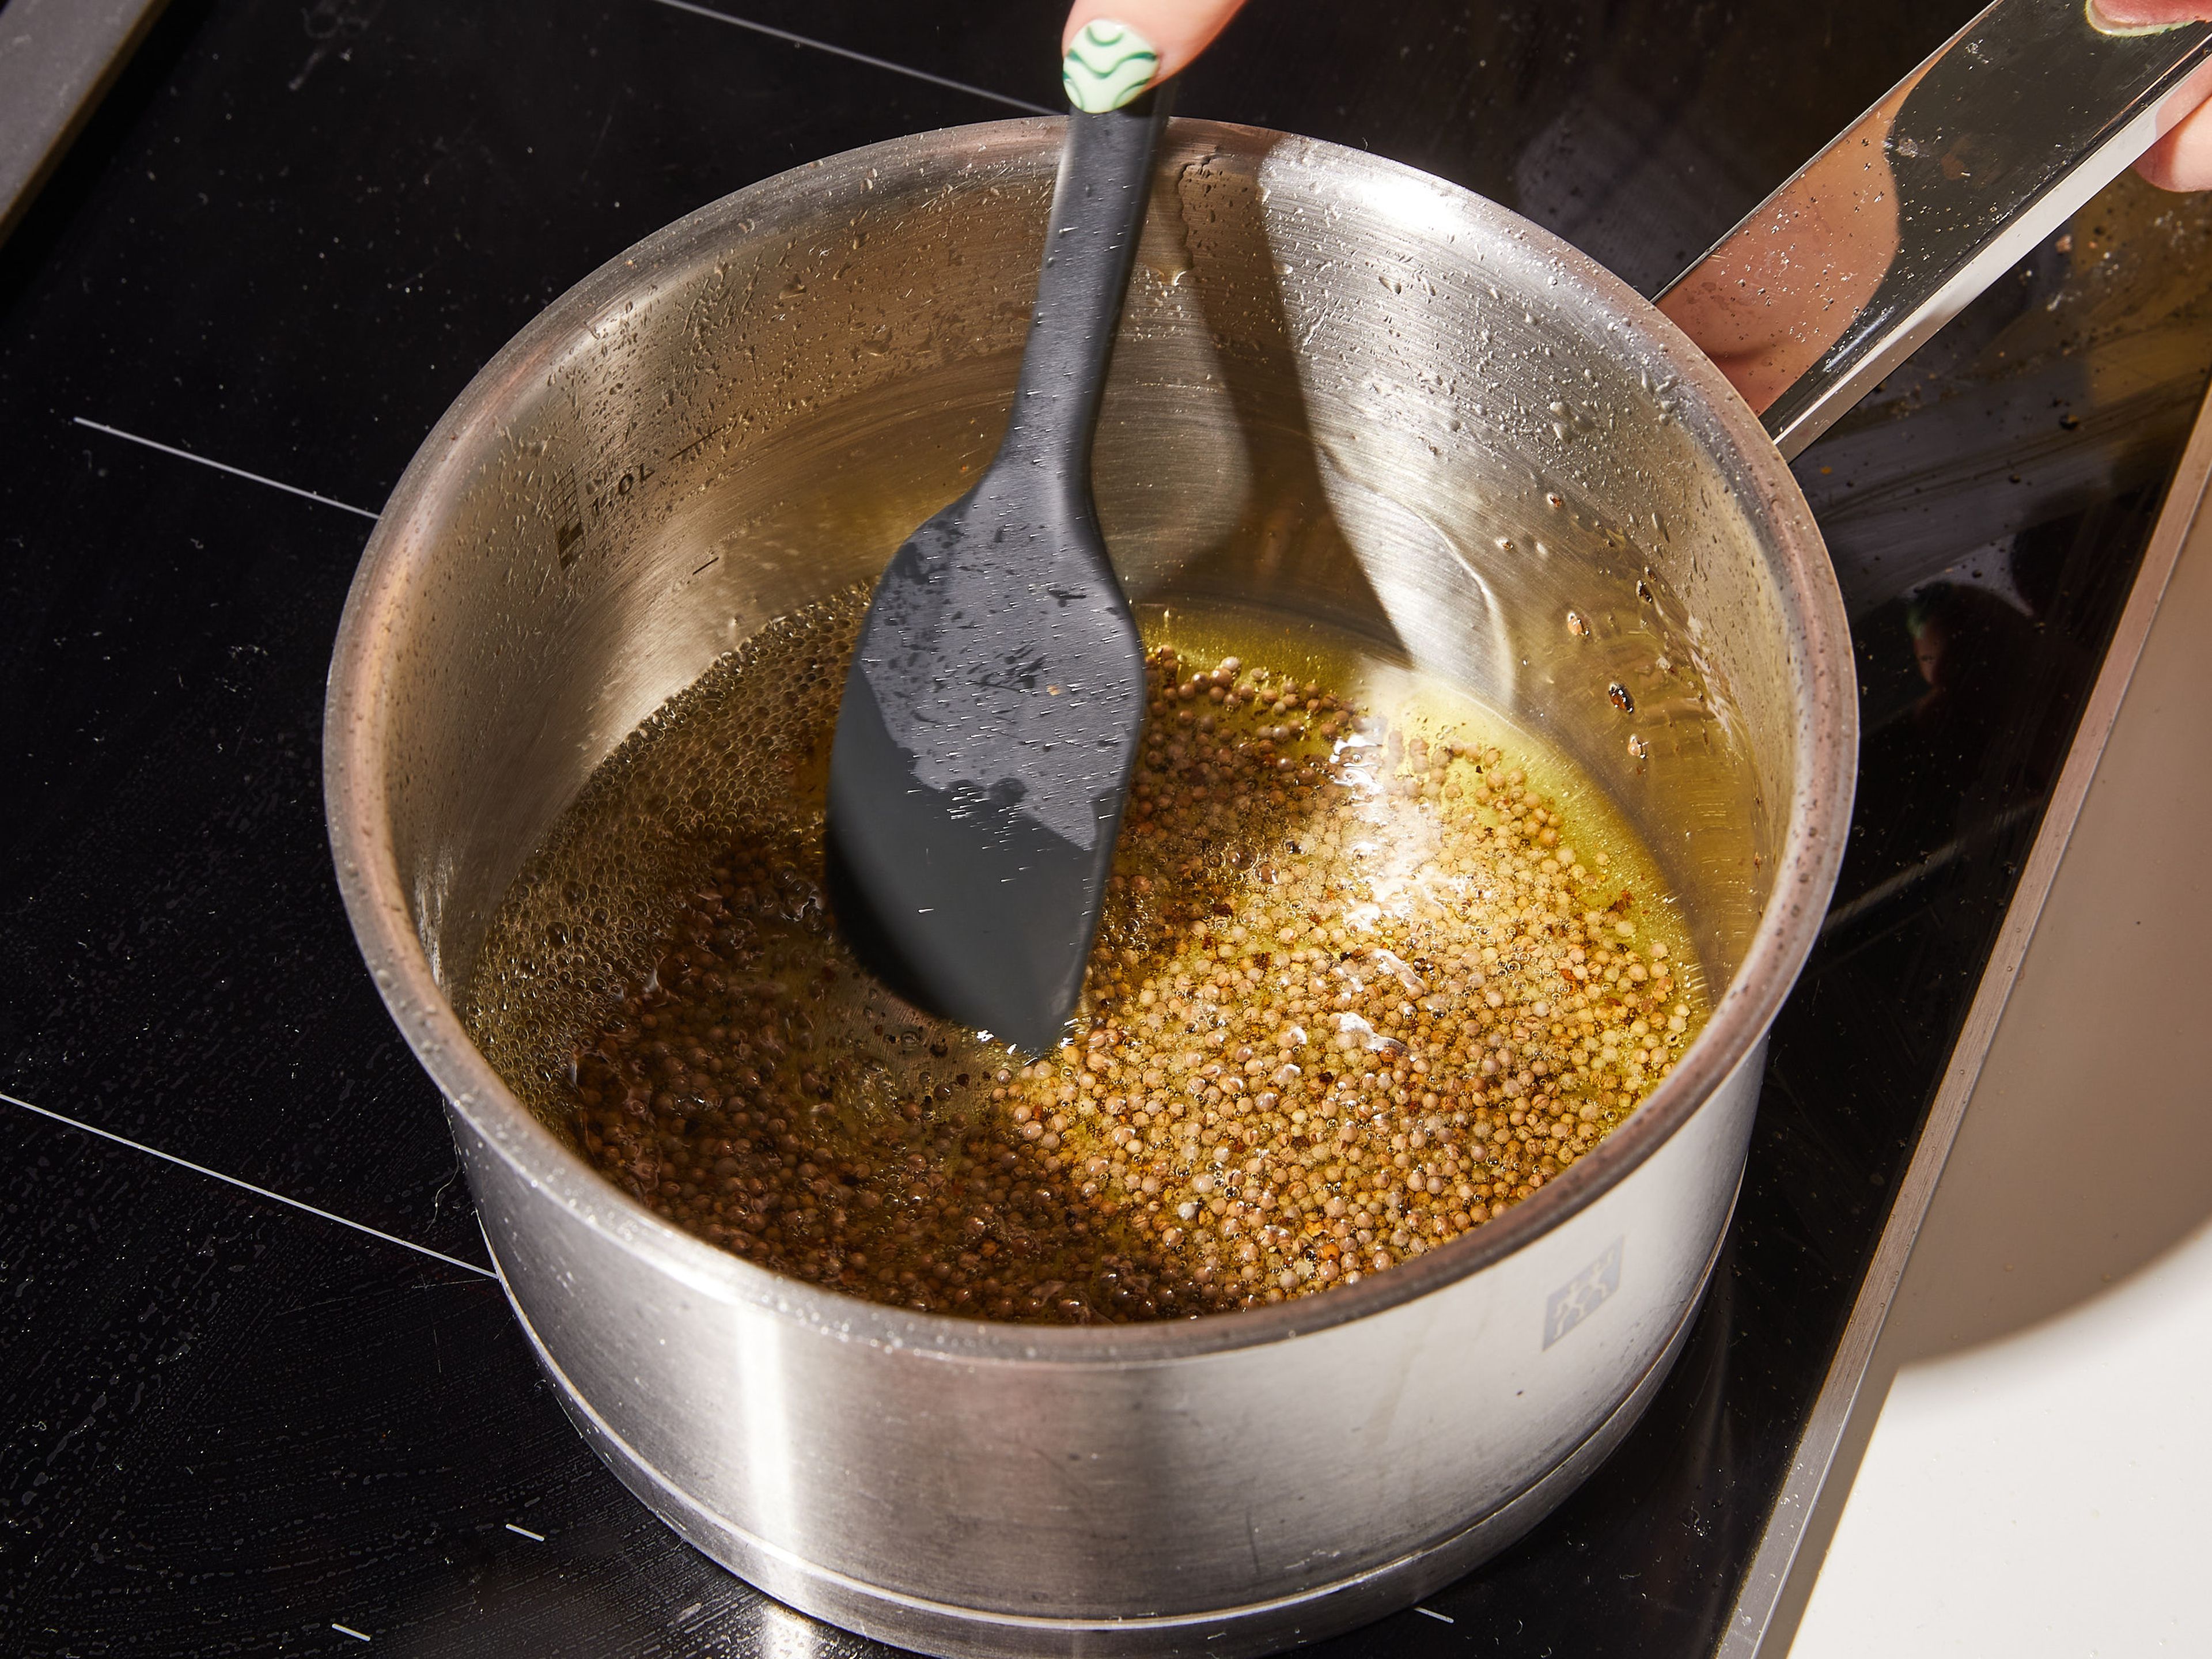 In a small saucepan on medium-high heat, heat mustard seeds with some black pepper and olive oil, until they start to sizzle, smell like popcorn, and turn a light brown. Then add the hot mixture directly to the orange zest in the bowl. Next, add mustard, honey and vinegar and season with salt. Use a whisk to mix everything into a creamy dressing.